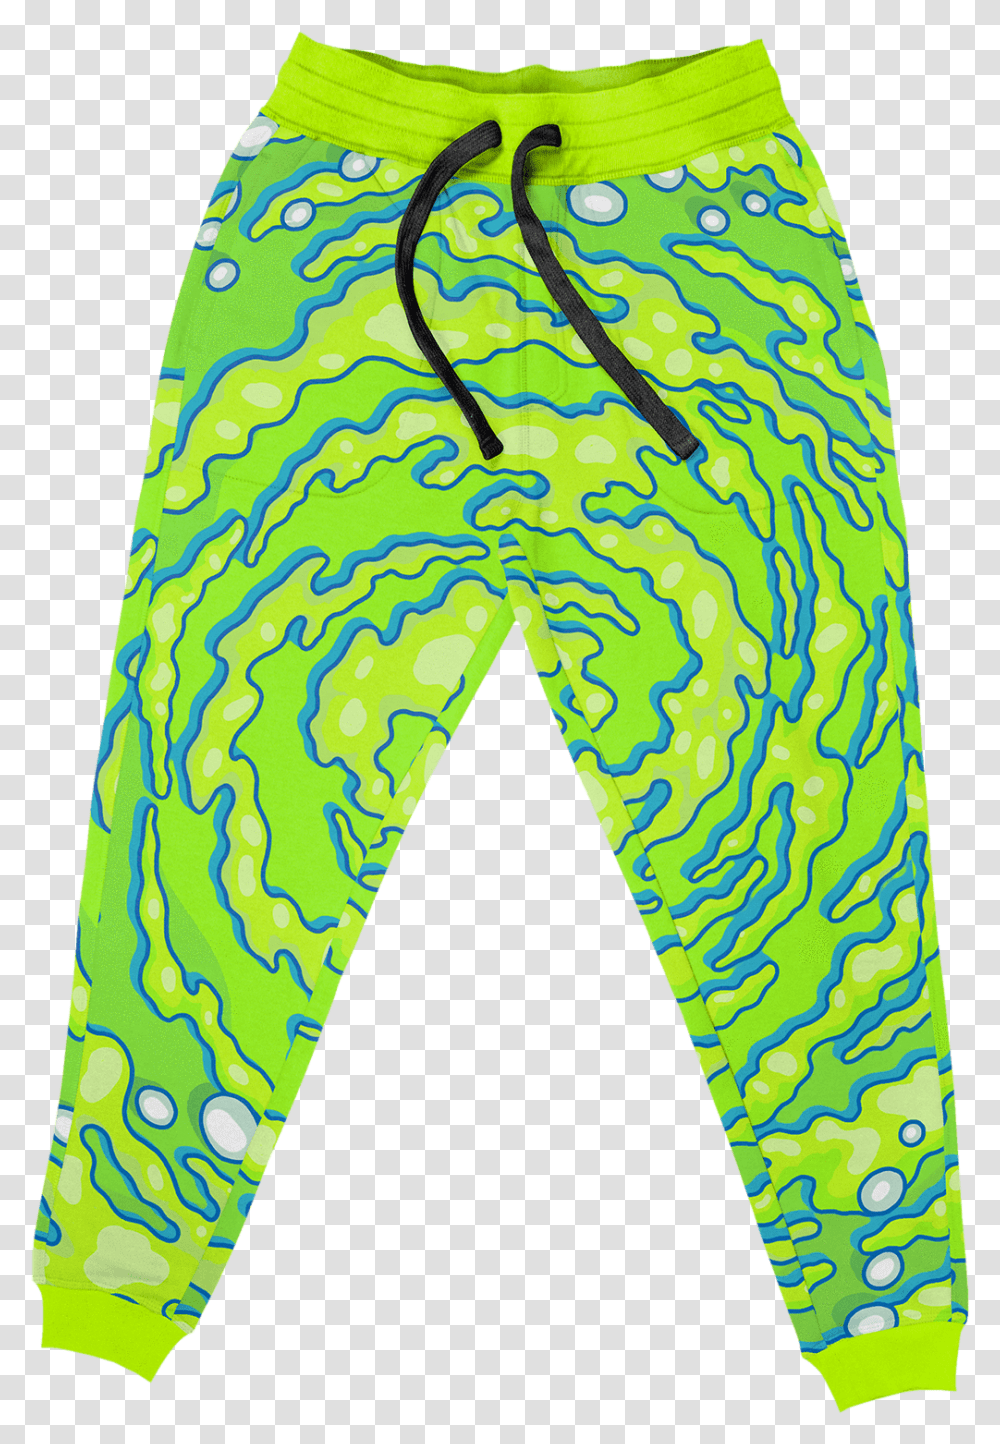 Neon Portal Joggers Jogger Pant Electro ThreadsClass Board Short, Water, Sea, Outdoors, Nature Transparent Png